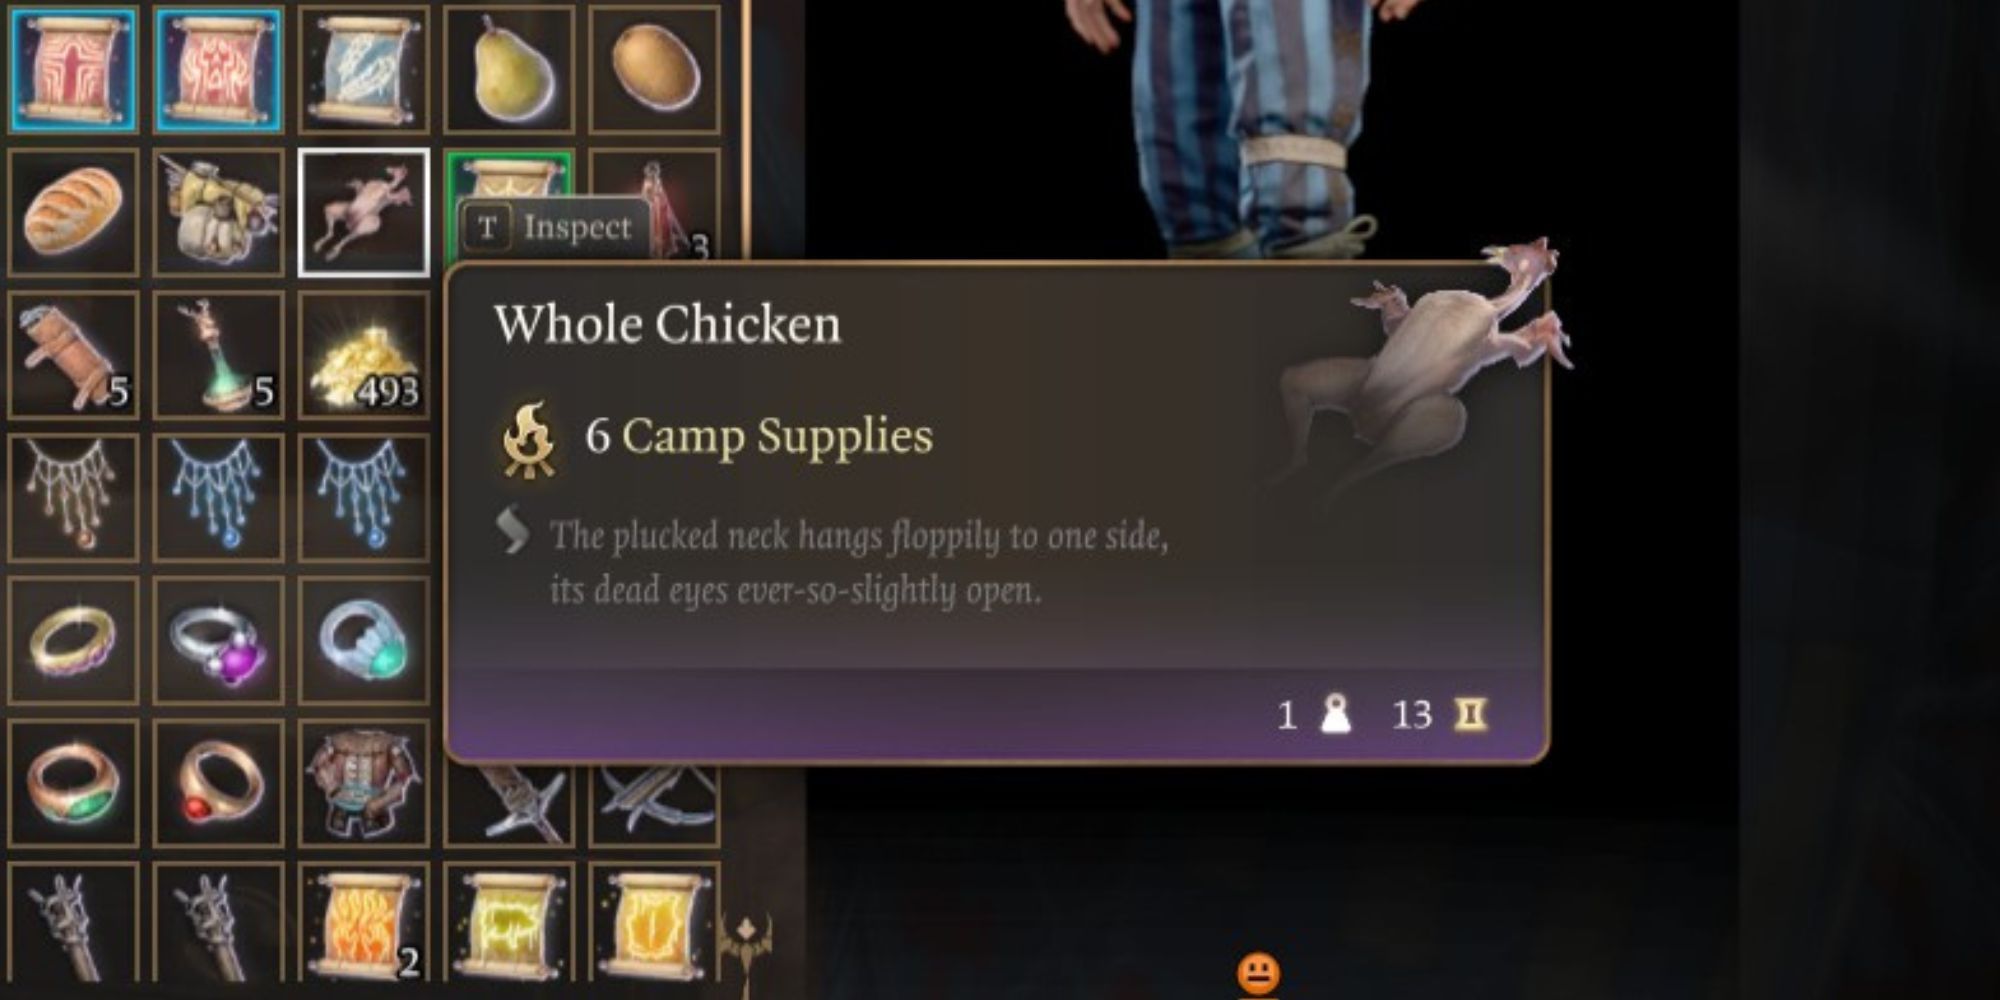 The food item a whole chicken in Baldur's Gate 3